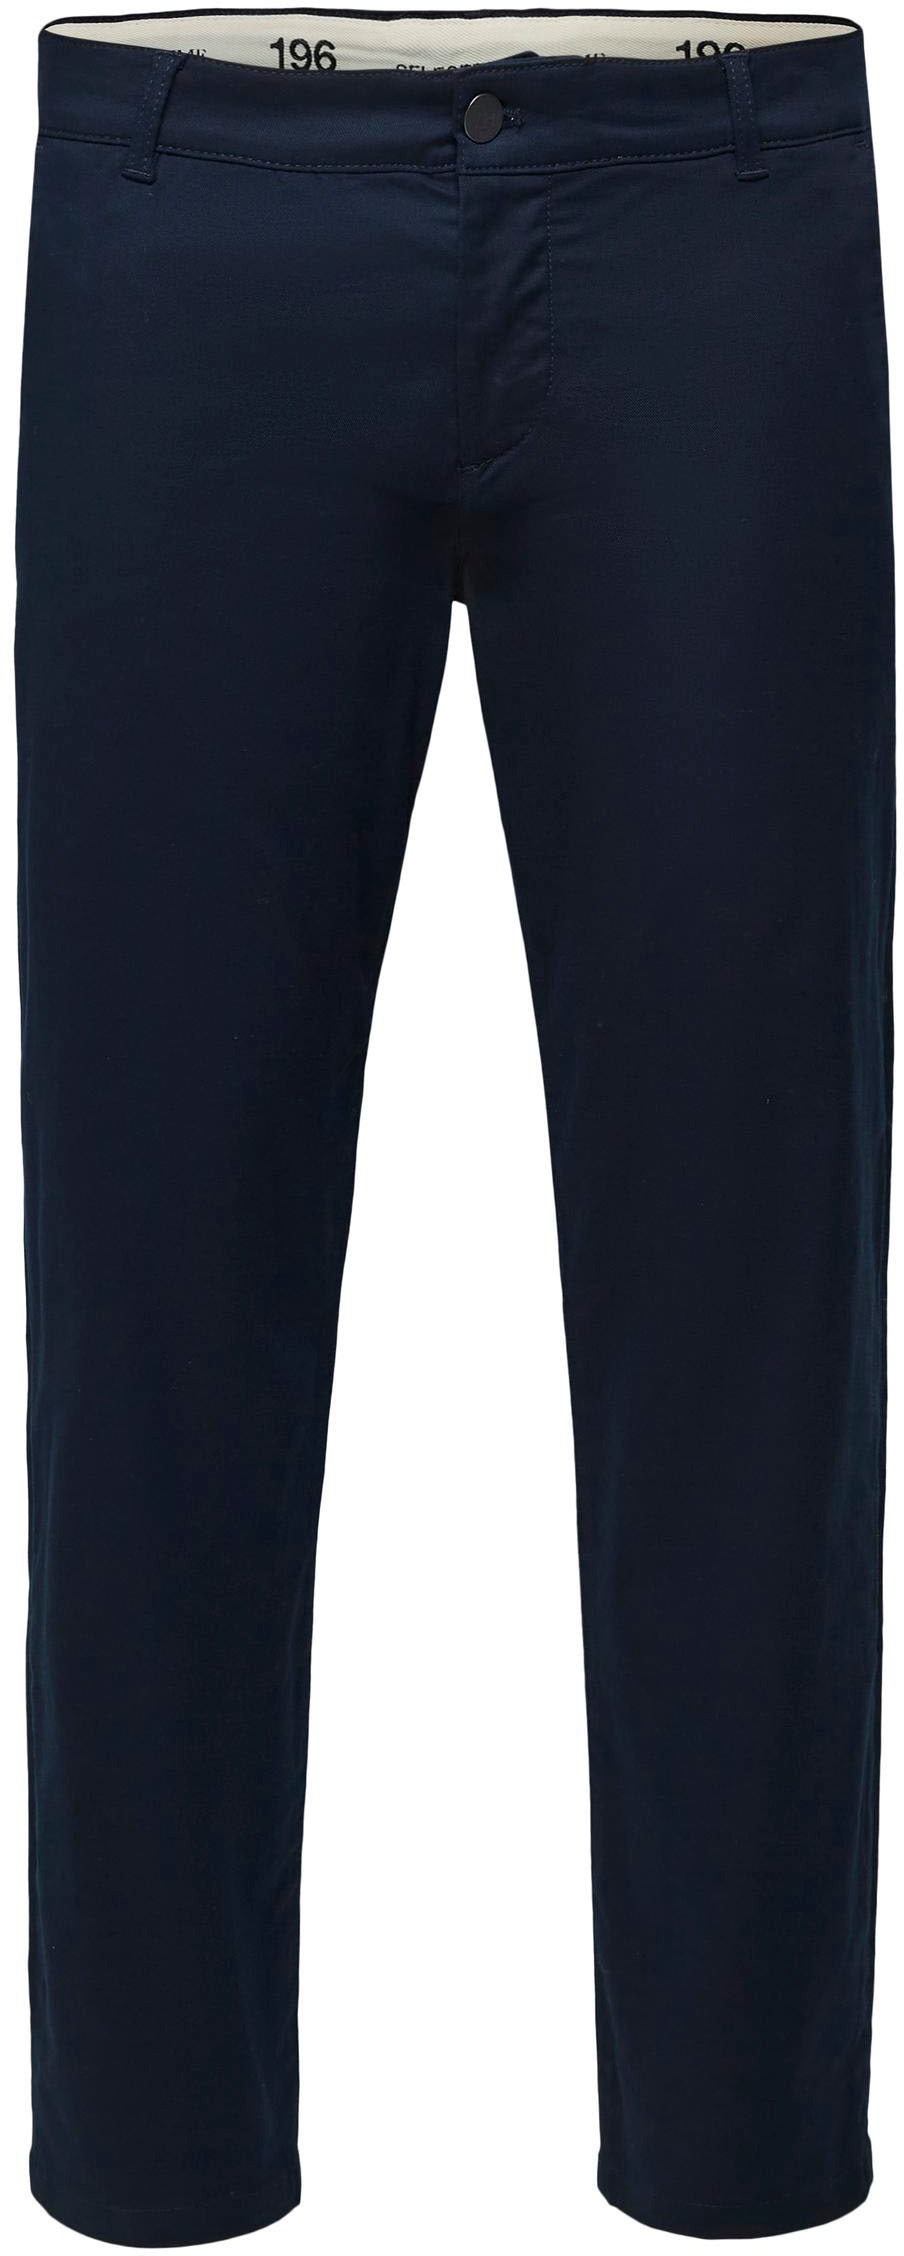 bestellen »SE Chino« SELECTED Online-Shop im HOMME Chinohose